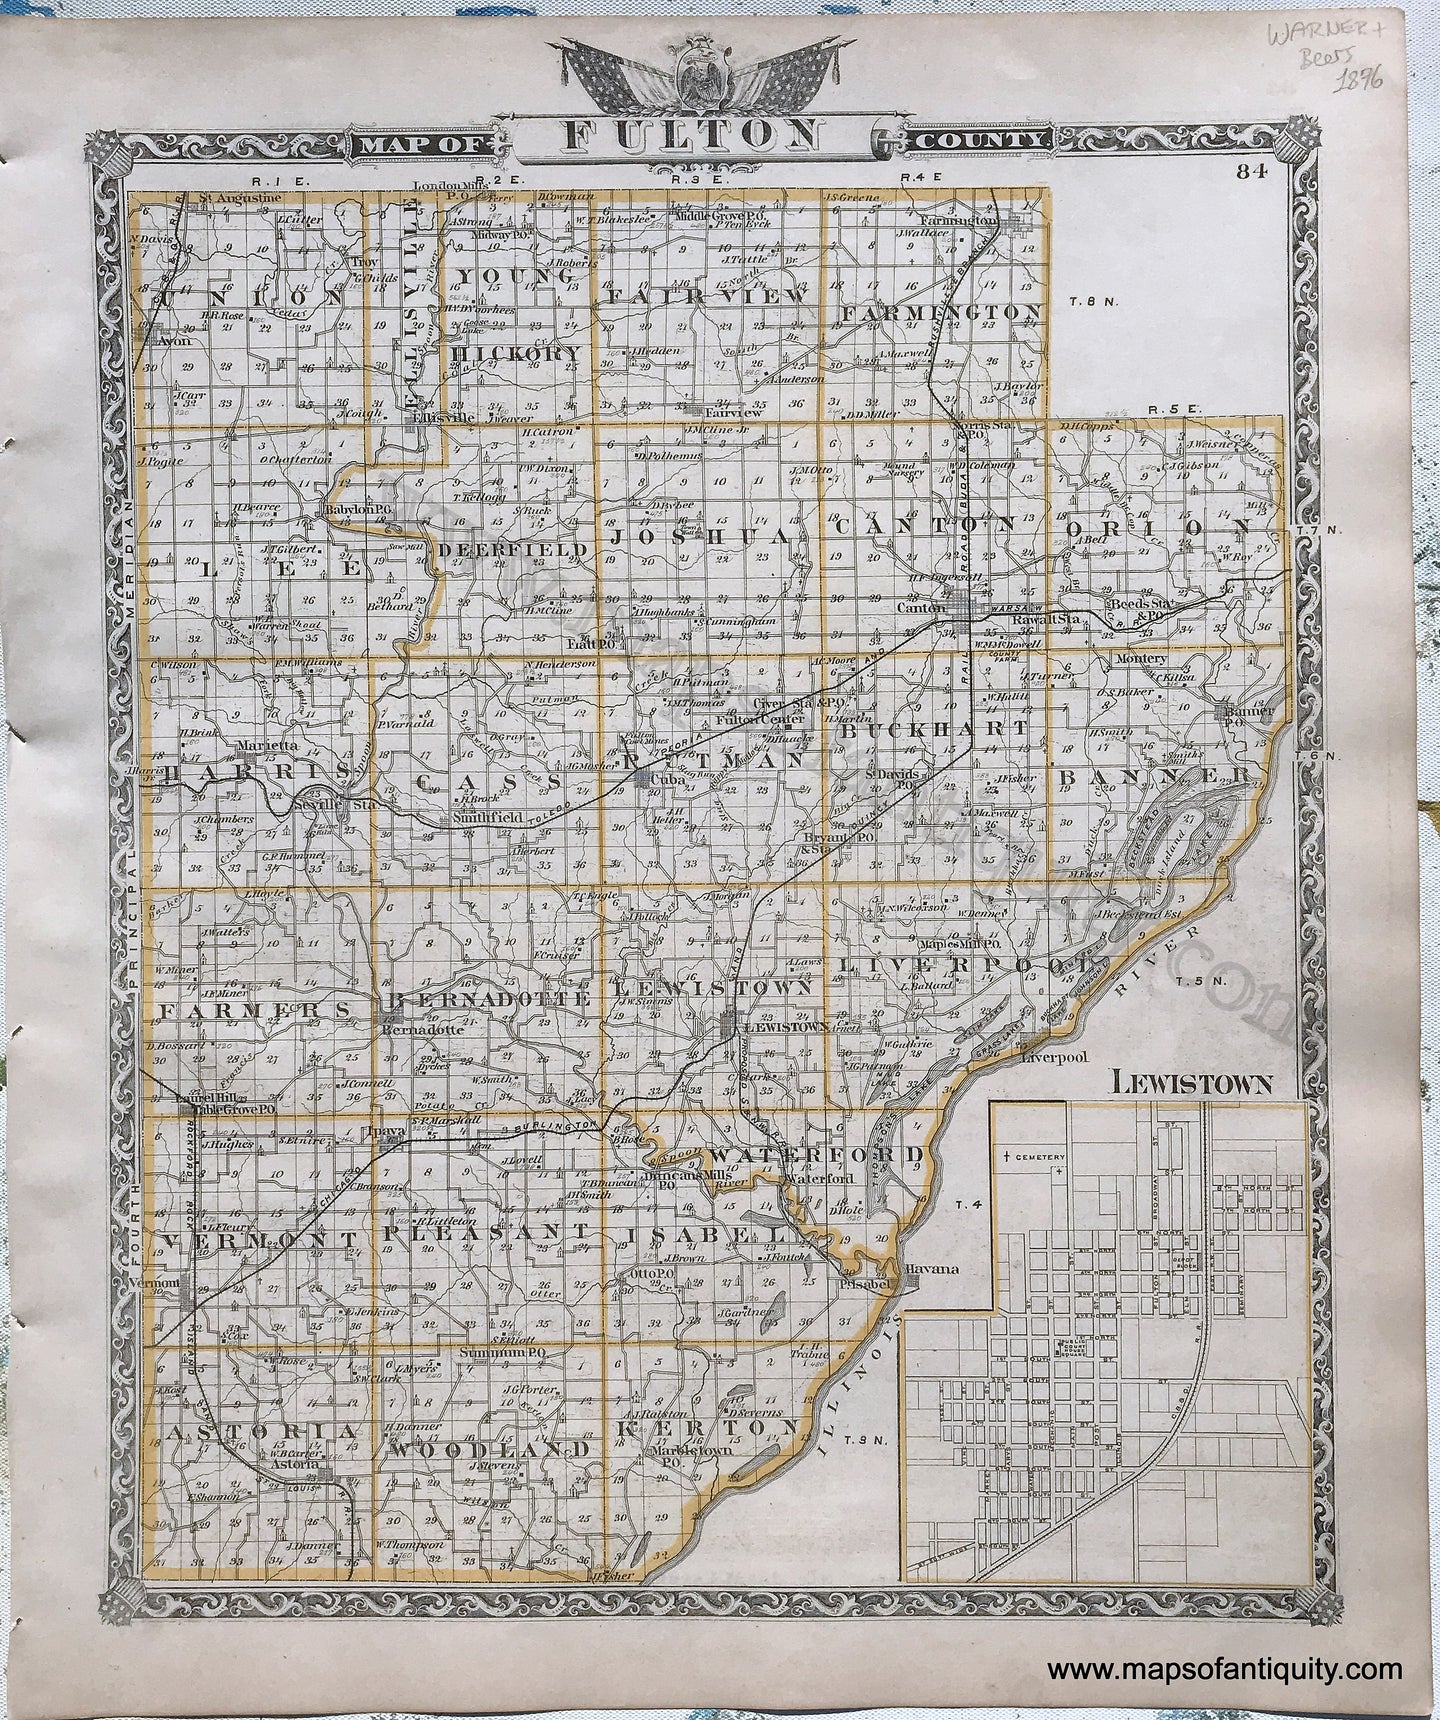 Antique-Hand-Colored-Map-Fulton-County;-verso:-McDonough-County-Illinois-1876-Warner-&-Beers-/-Union-Atlas-Co.-Midwest-1800s-19th-century-Maps-of-Antiquity